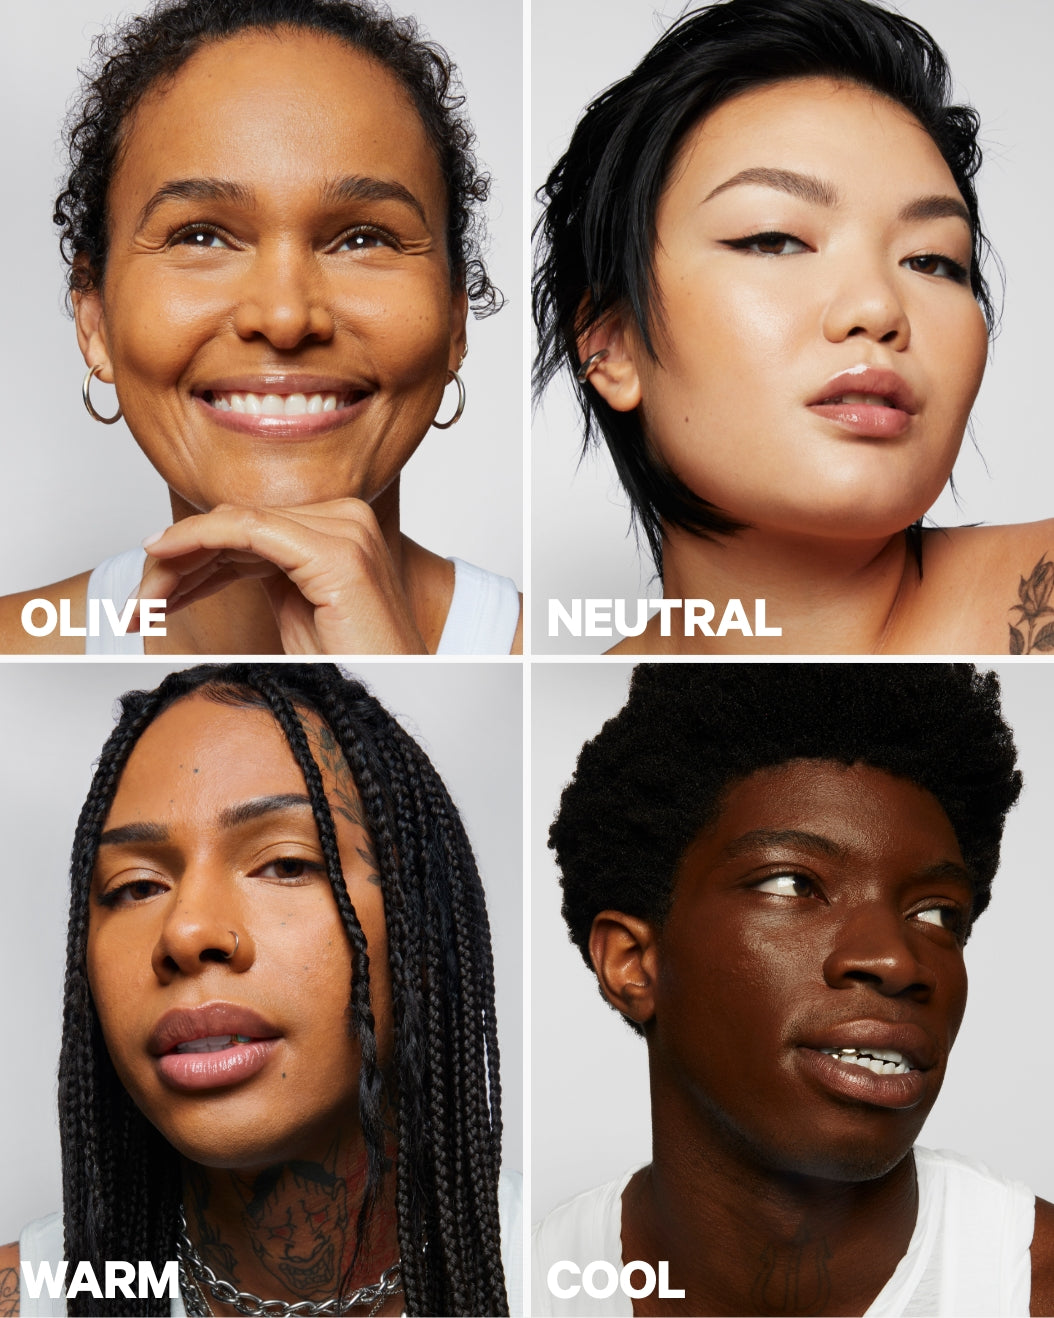 Quad of models with different skin tones who have either warm, cool, neutral, or olive undertones.